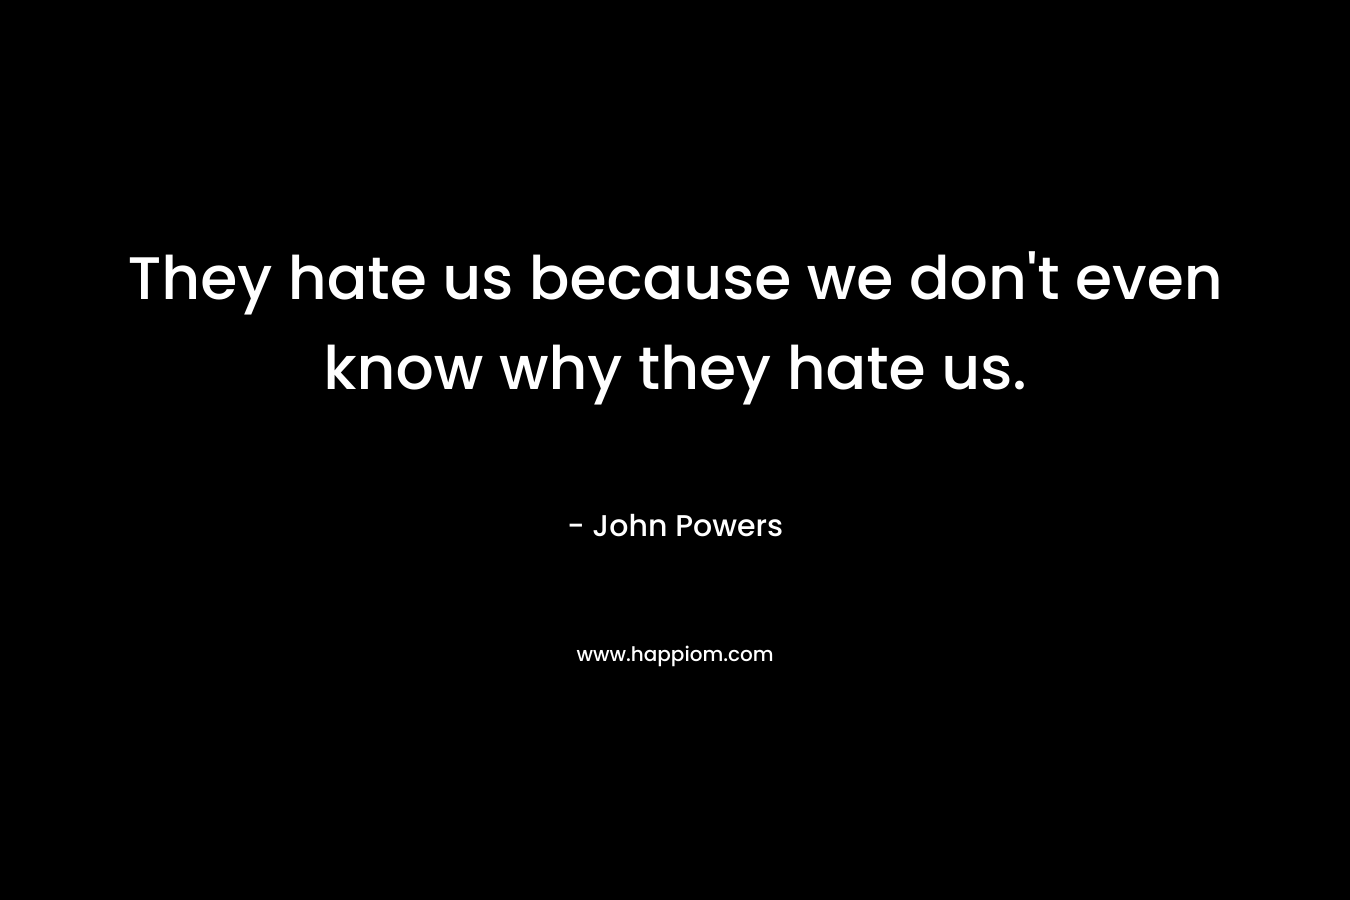 They hate us because we don’t even know why they hate us. – John Powers